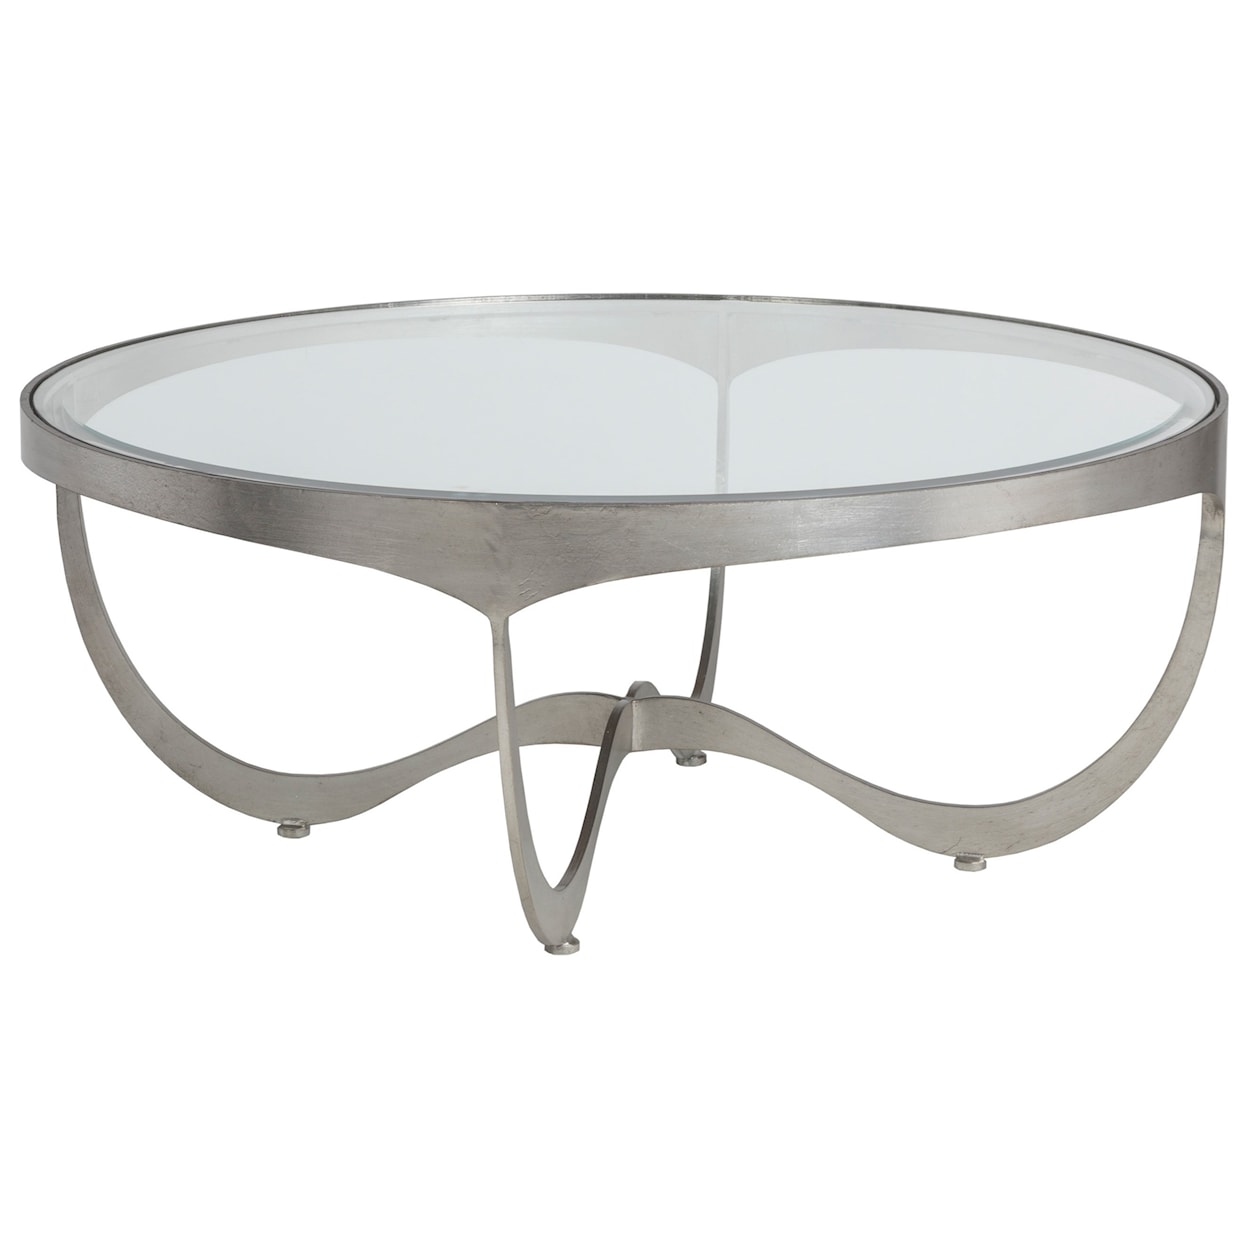 Artistica Artistica Metal Sophie Round Cocktail Table